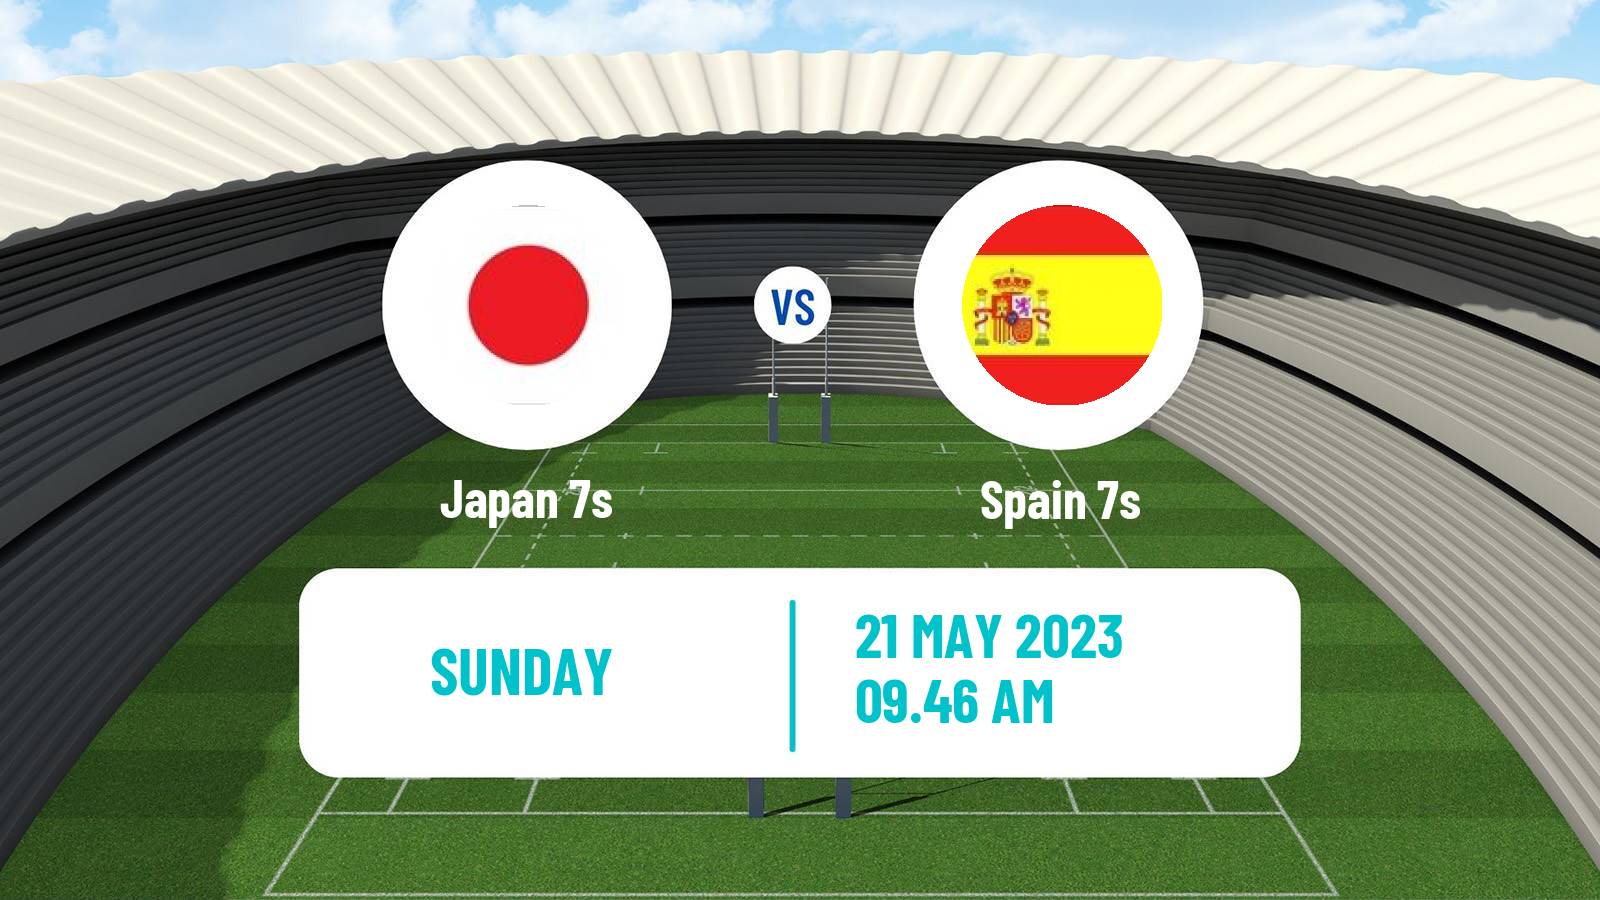 Rugby union Sevens World Series - England Japan 7s - Spain 7s